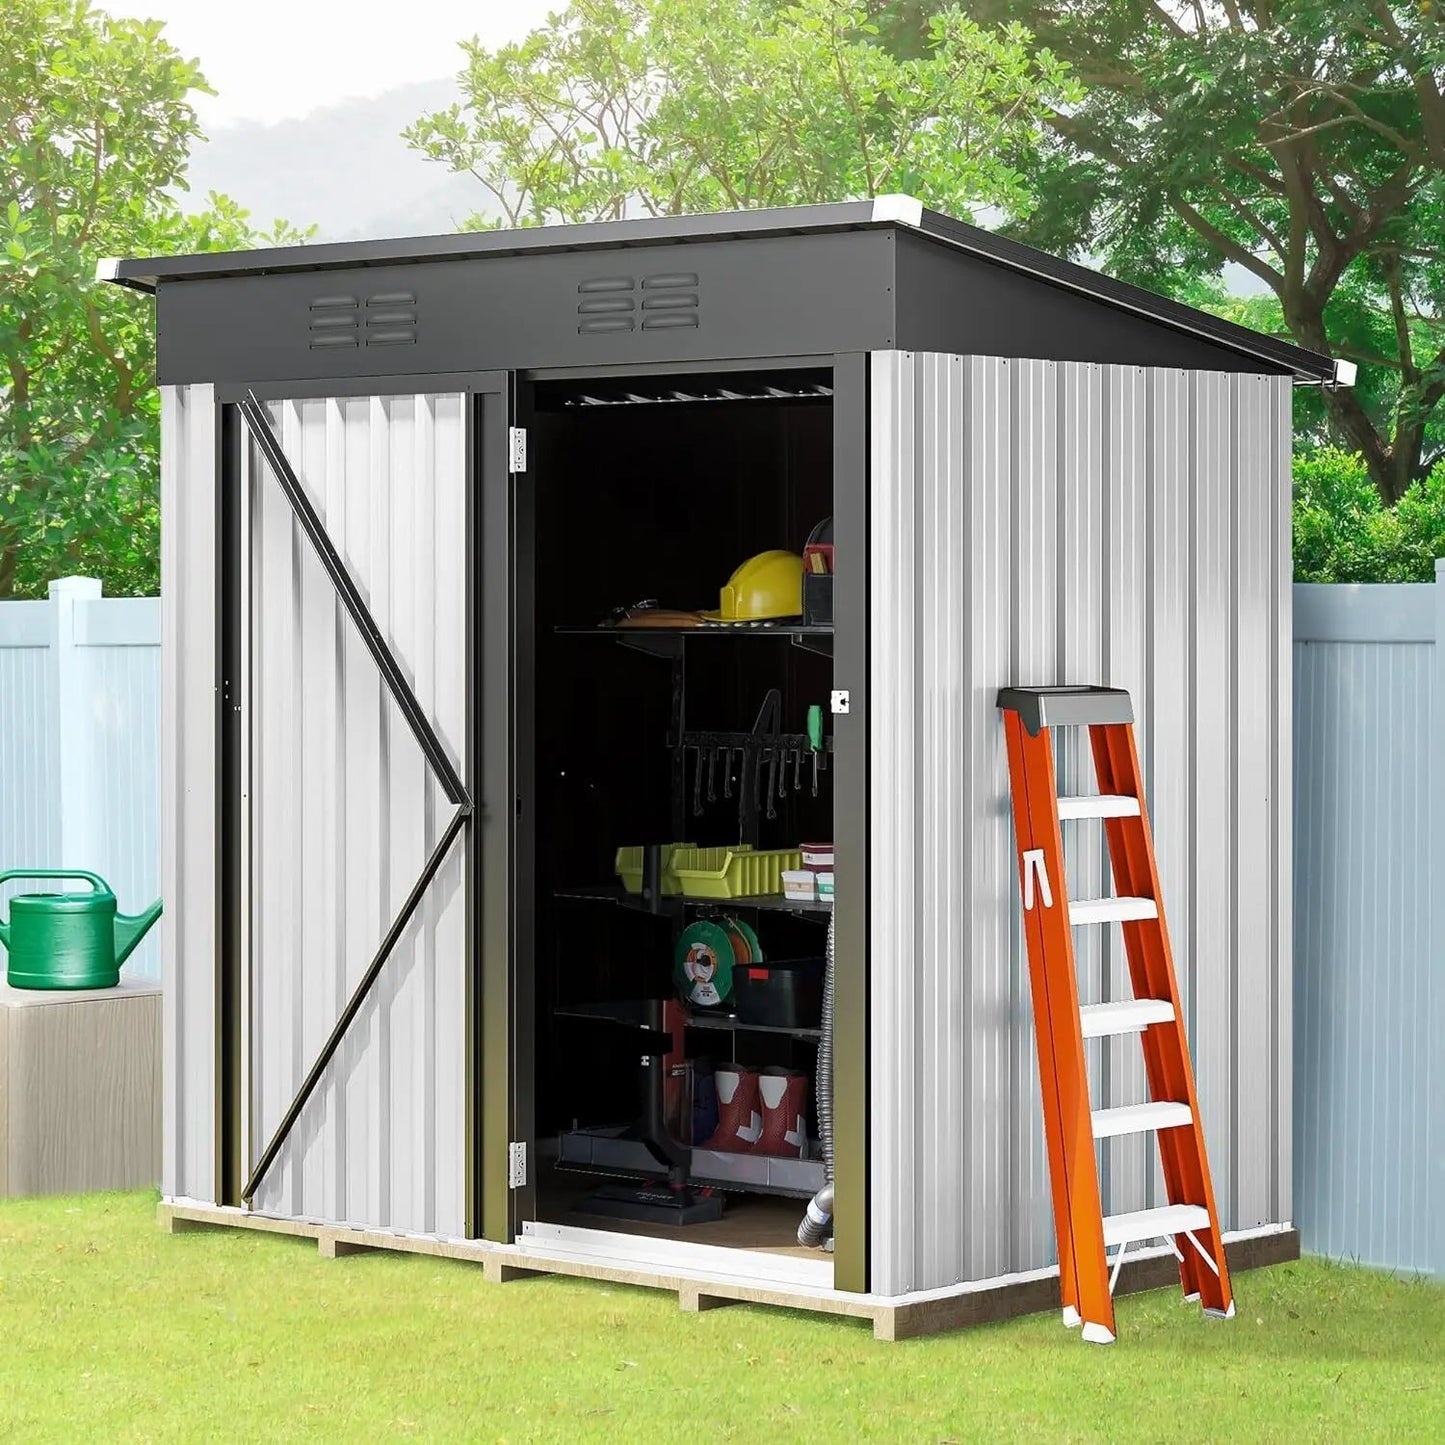 -Outdoor Metal Storage Shed for Backyard Garden tool shed - Outdoor Style Company